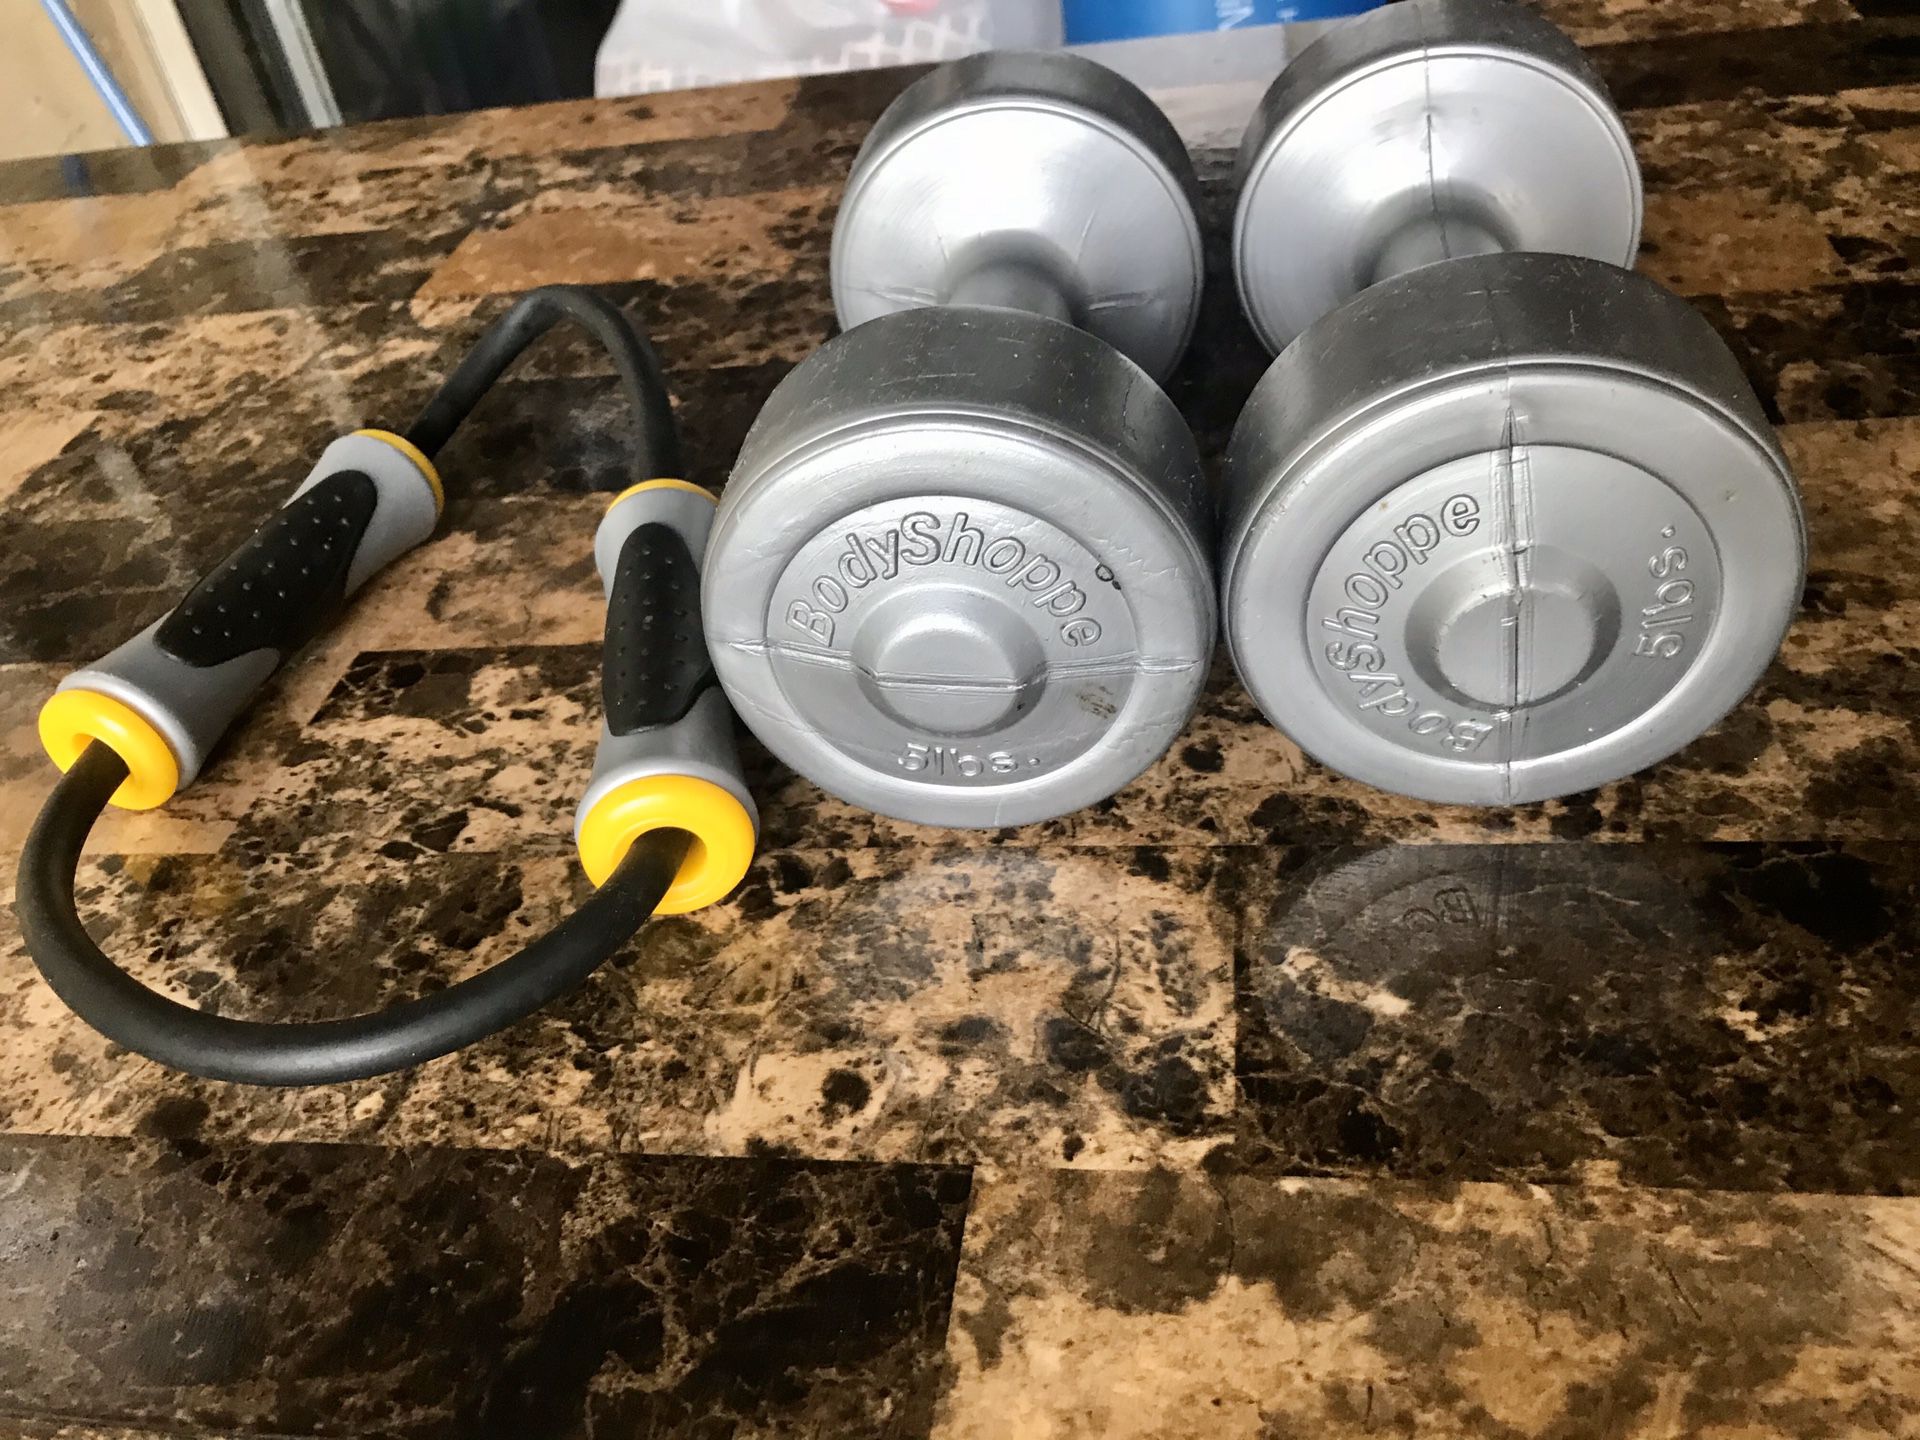 5 lb dumbbells and resistant band